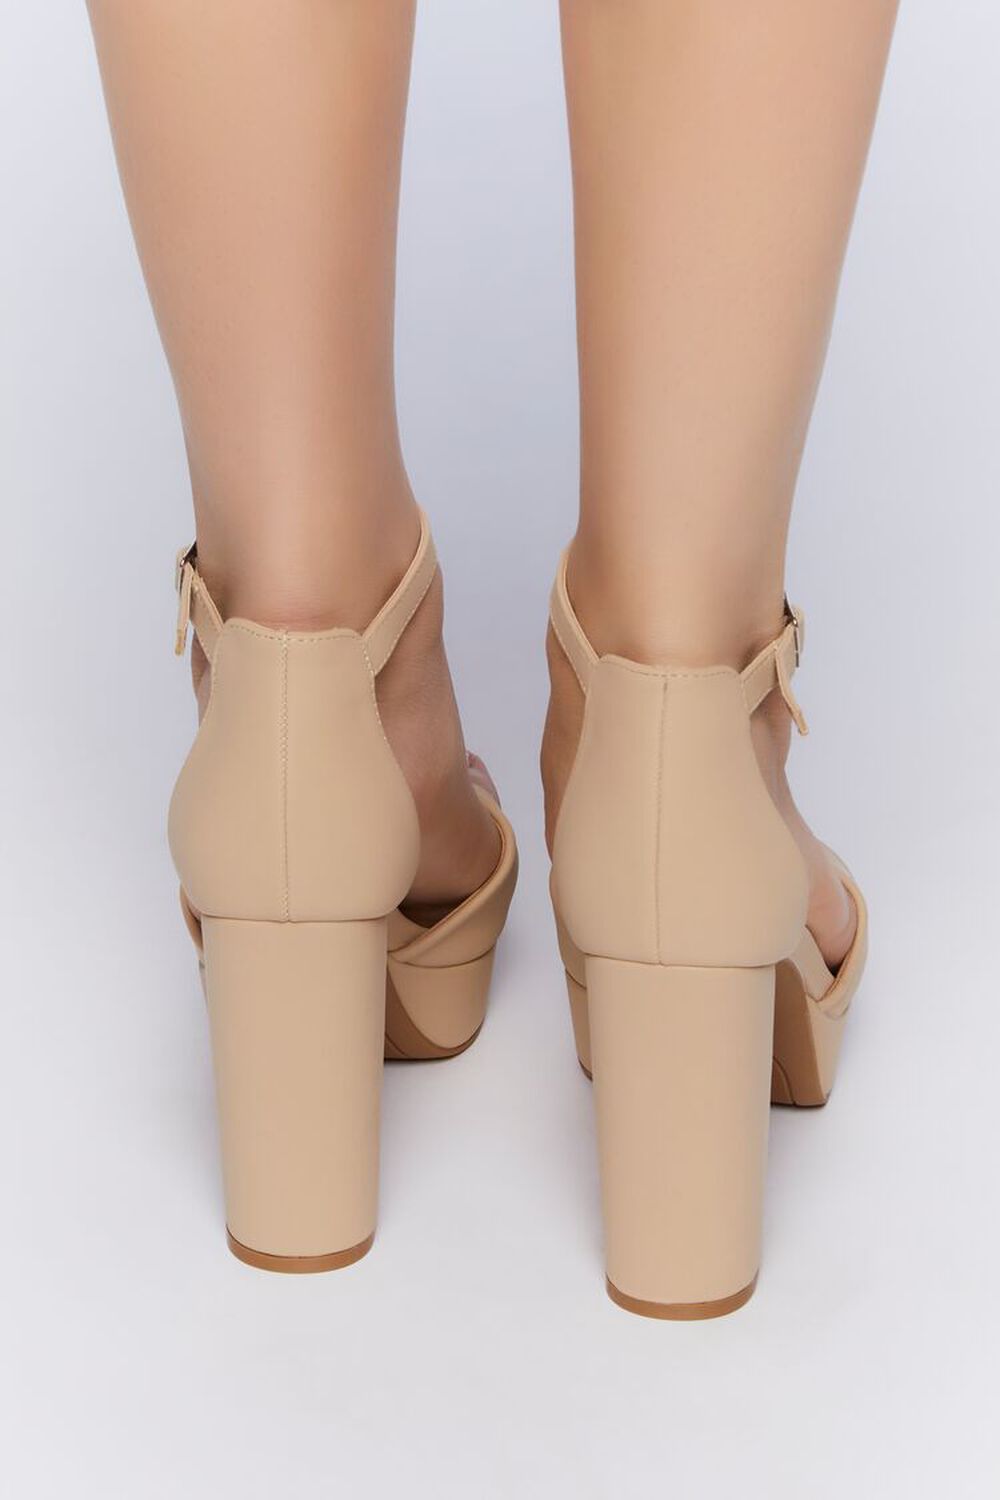 NUDE Faux Leather Block Heels, image 3